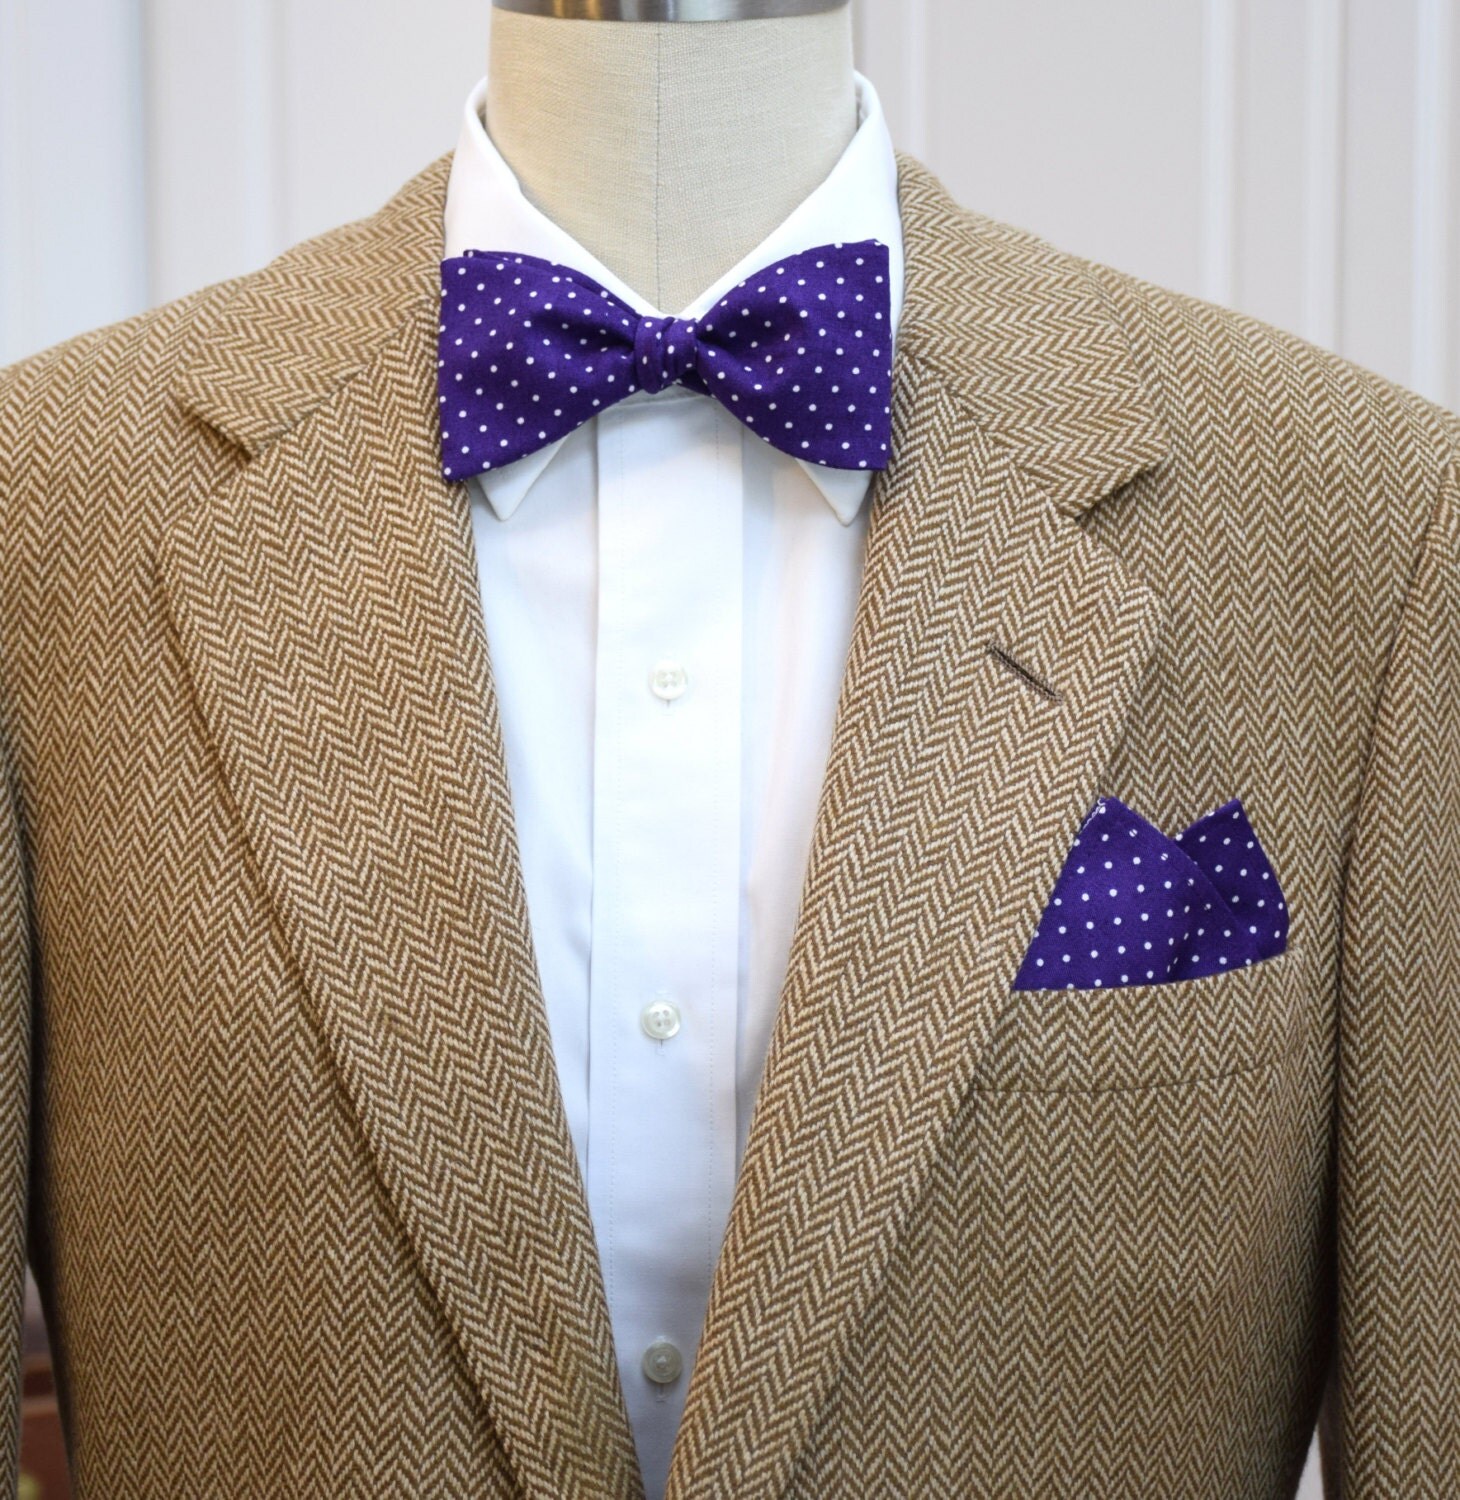 Men's Pocket Square and Bow Tie in royal purple with white pin dots ...